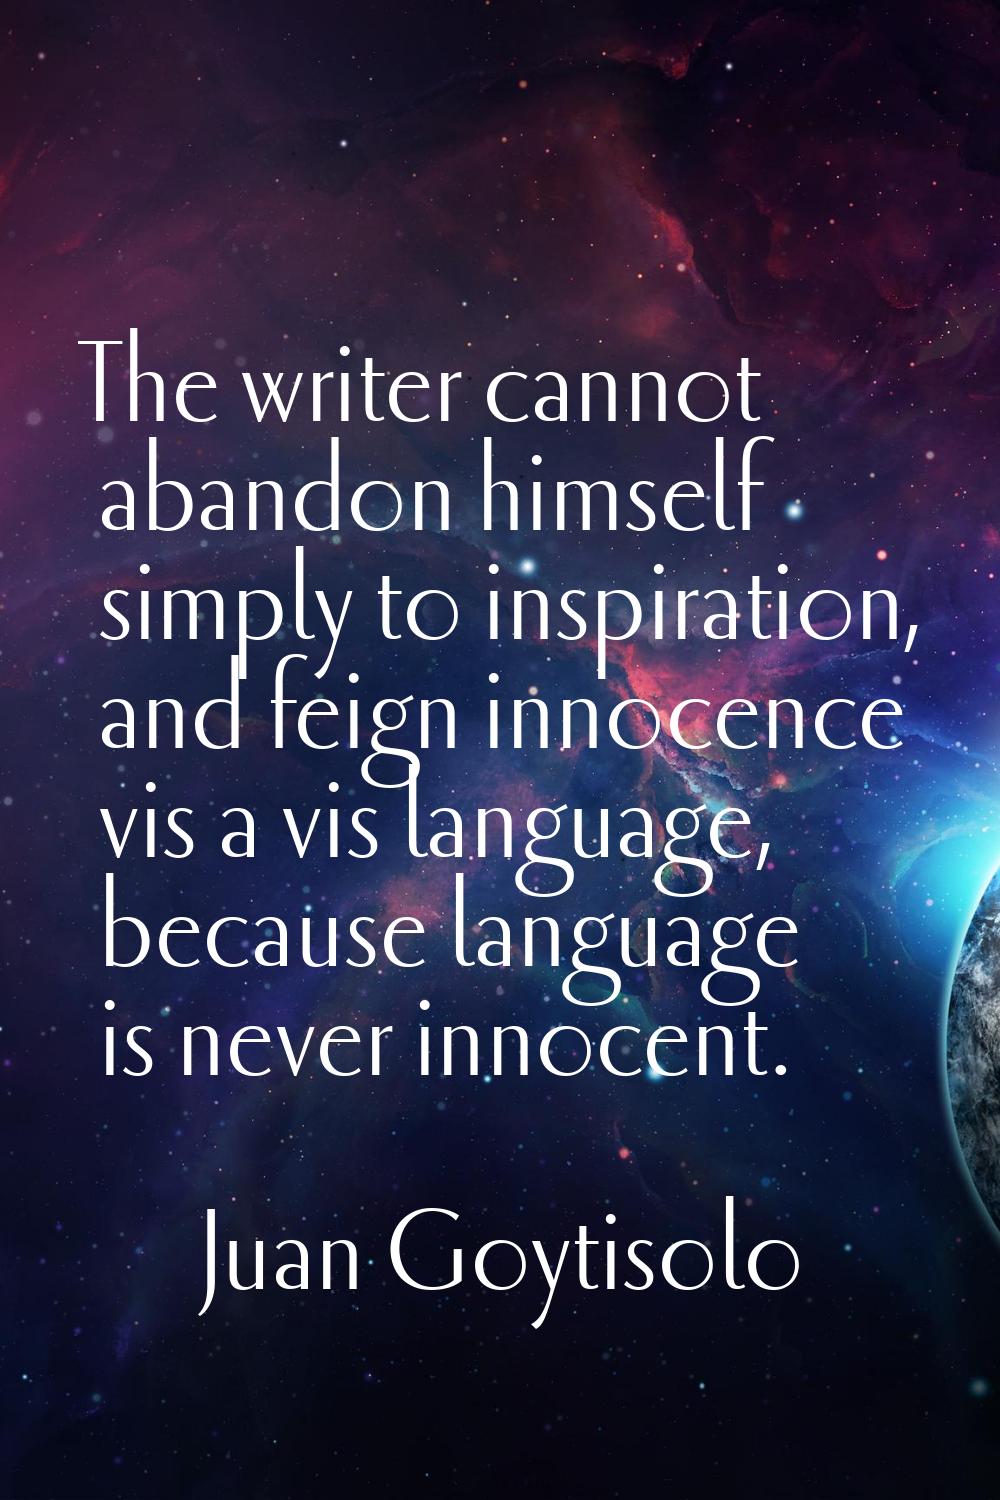 The writer cannot abandon himself simply to inspiration, and feign innocence vis a vis language, be